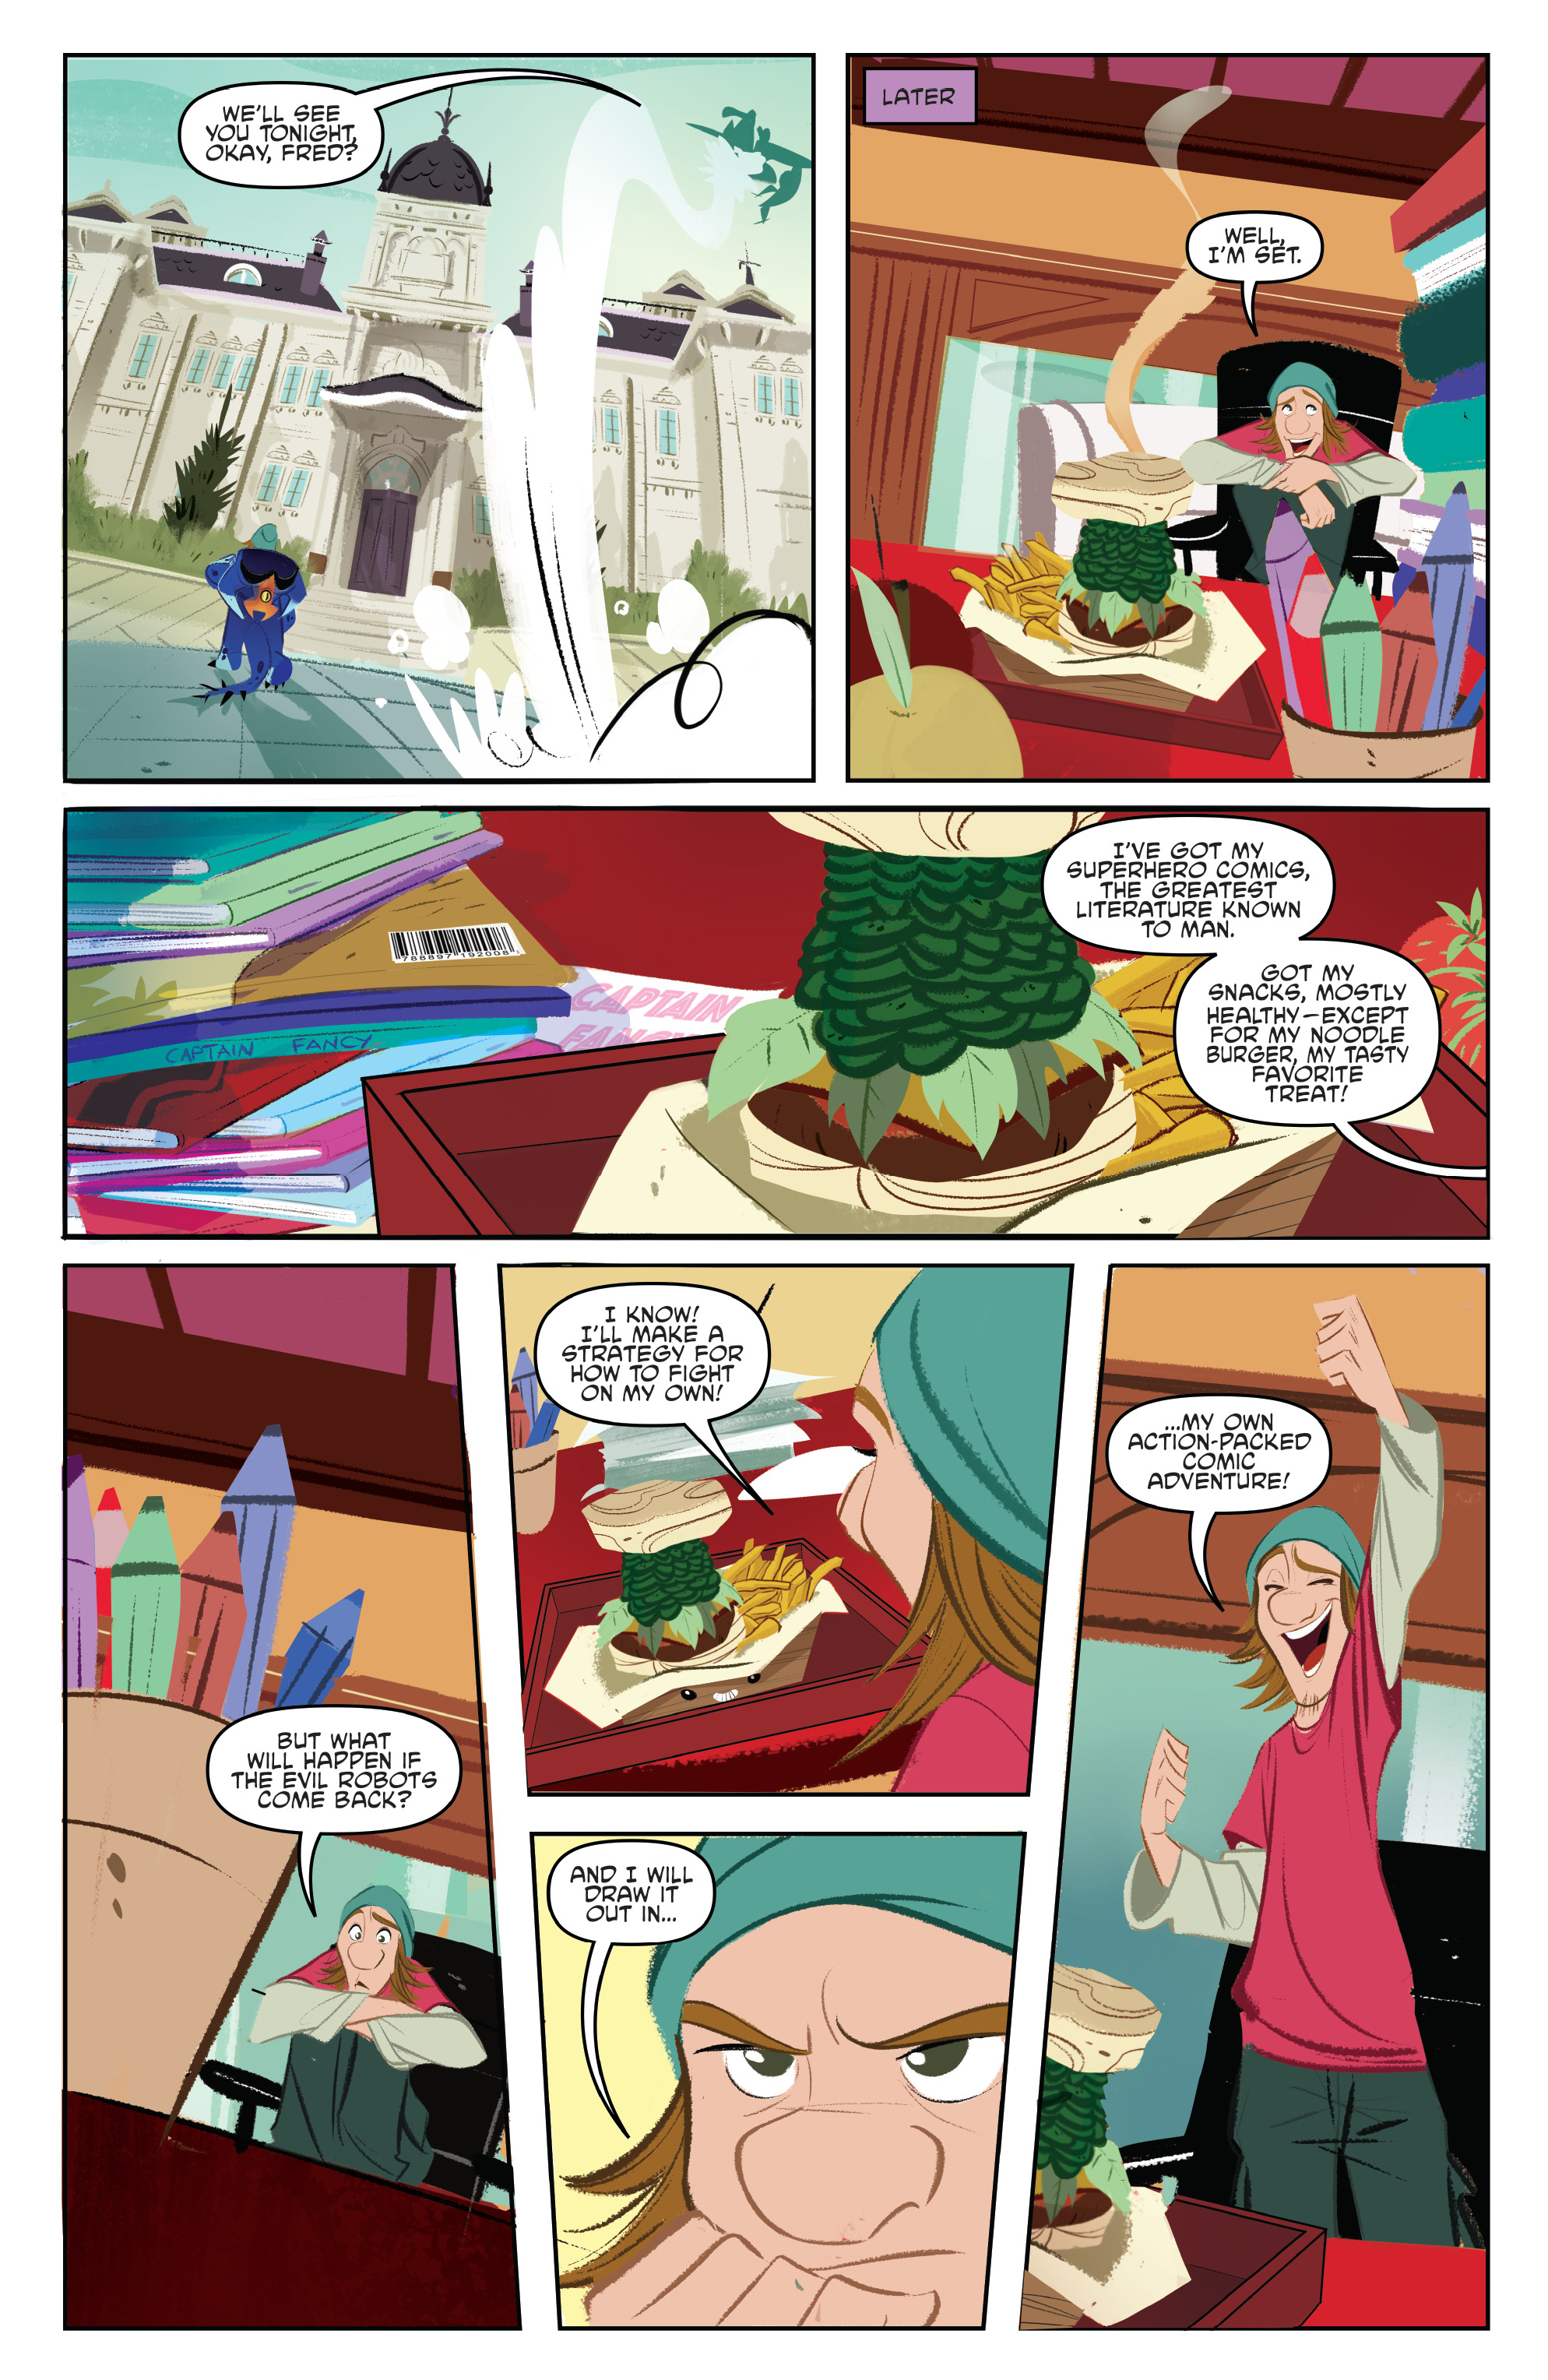 Big Hero 6 The Series Issue 1 | Read Big Hero 6 The Series Issue 1 comic  online in high quality. Read Full Comic online for free - Read comics  online in high quality .| READ COMIC ONLINE